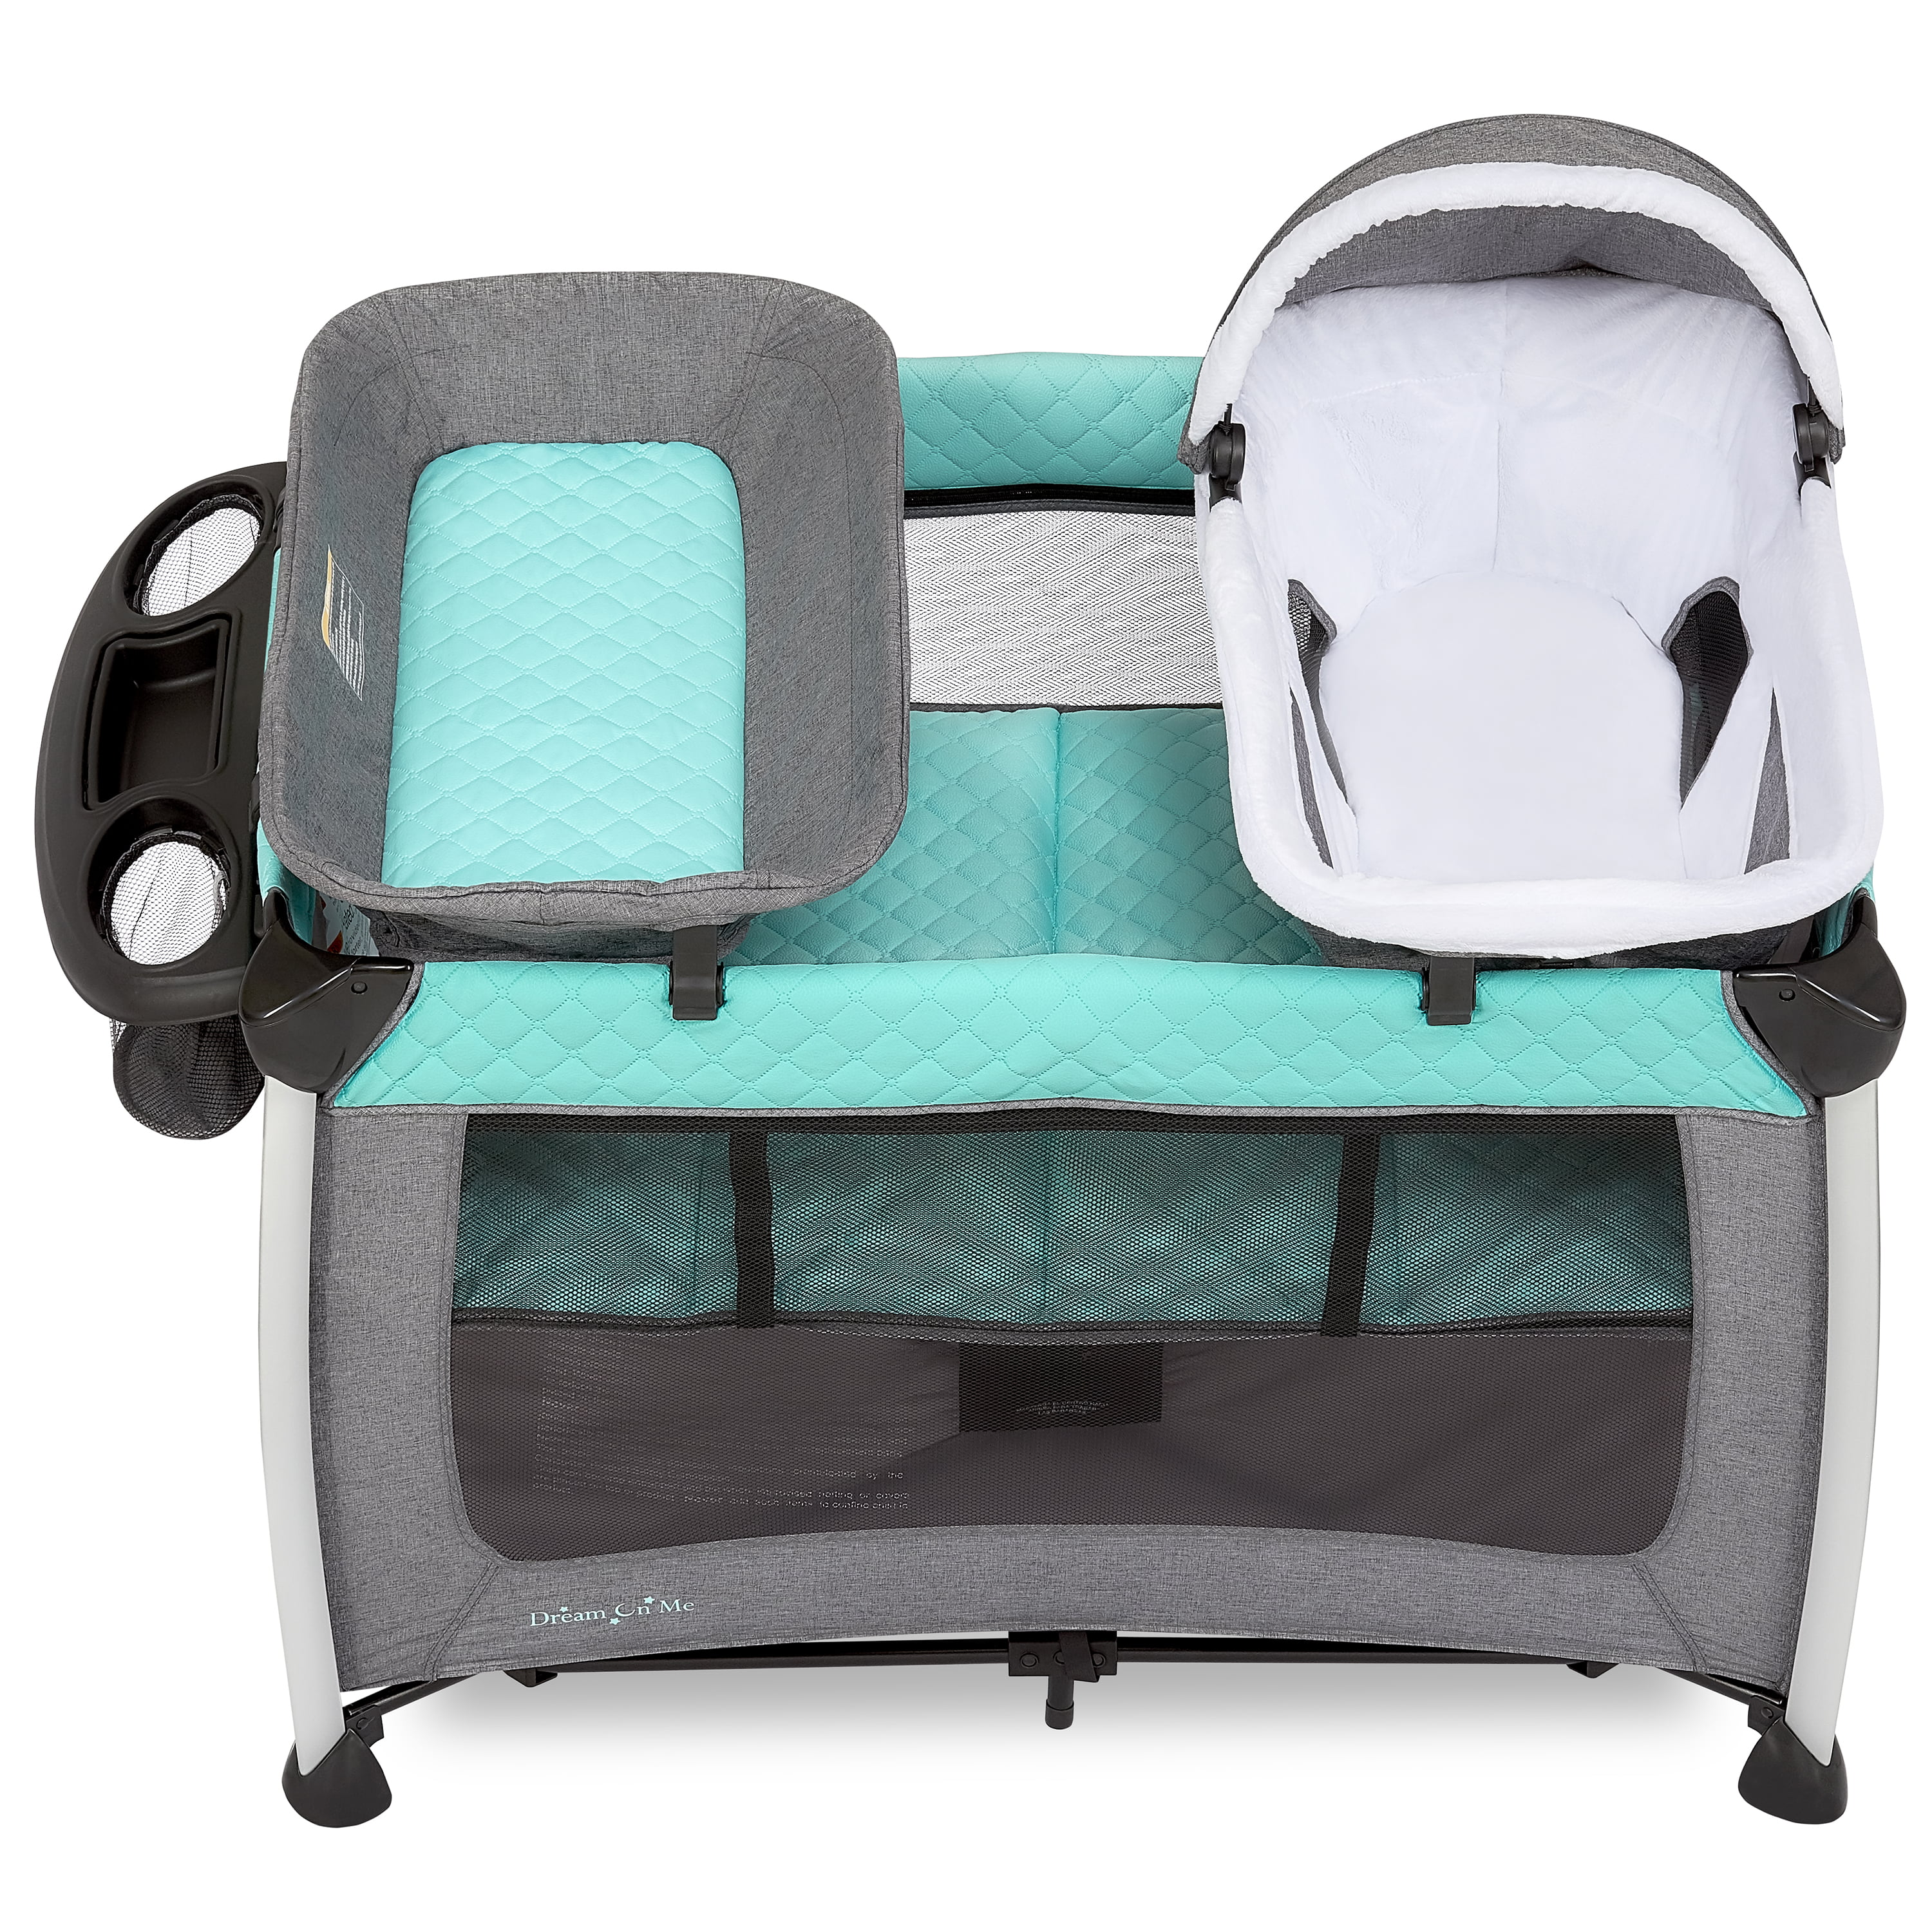 Dream On Me Princeton Deluxe Playard I Nap ‘N pack I Play Yard I Infant Bassinet I Compact Fold I Removeable Changing Table I Removable Napper 